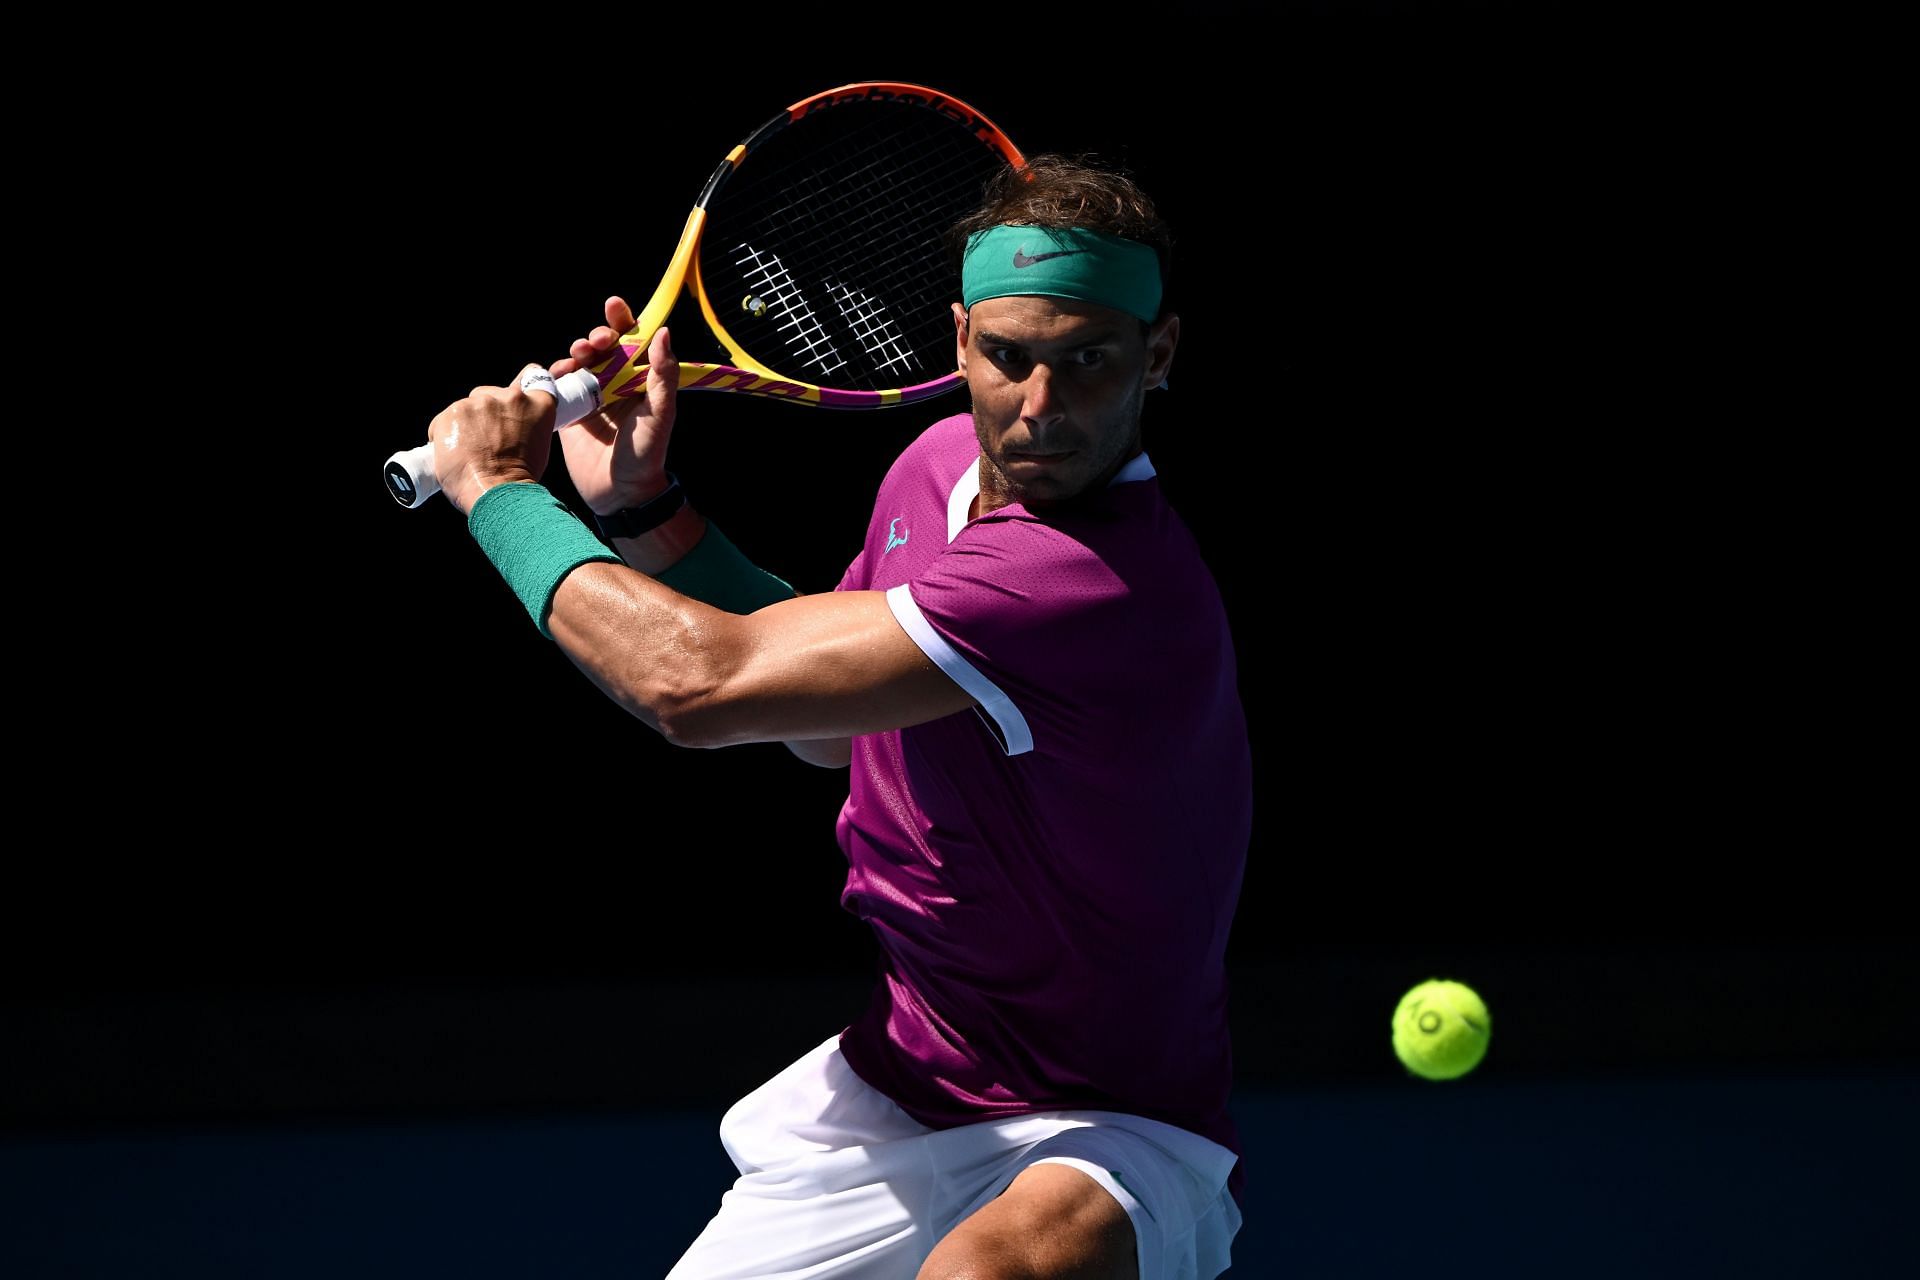 The Spaniard attempts a backhand in his match against Mannarino